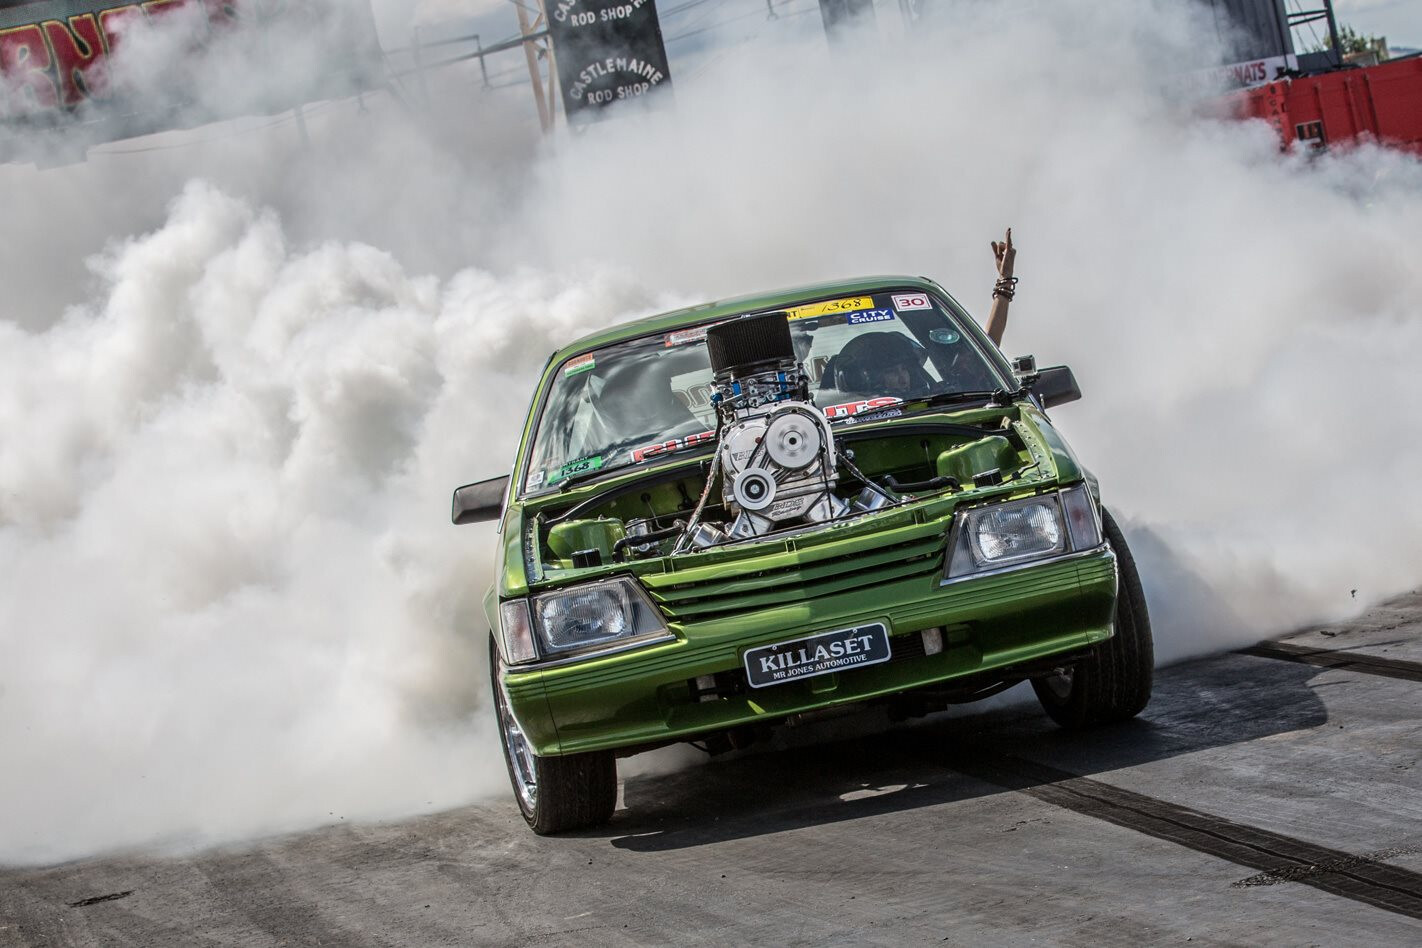 ONBOARD THE KILLASET VK COMMODORE AT SUMMERNATS 30 – VIDEO